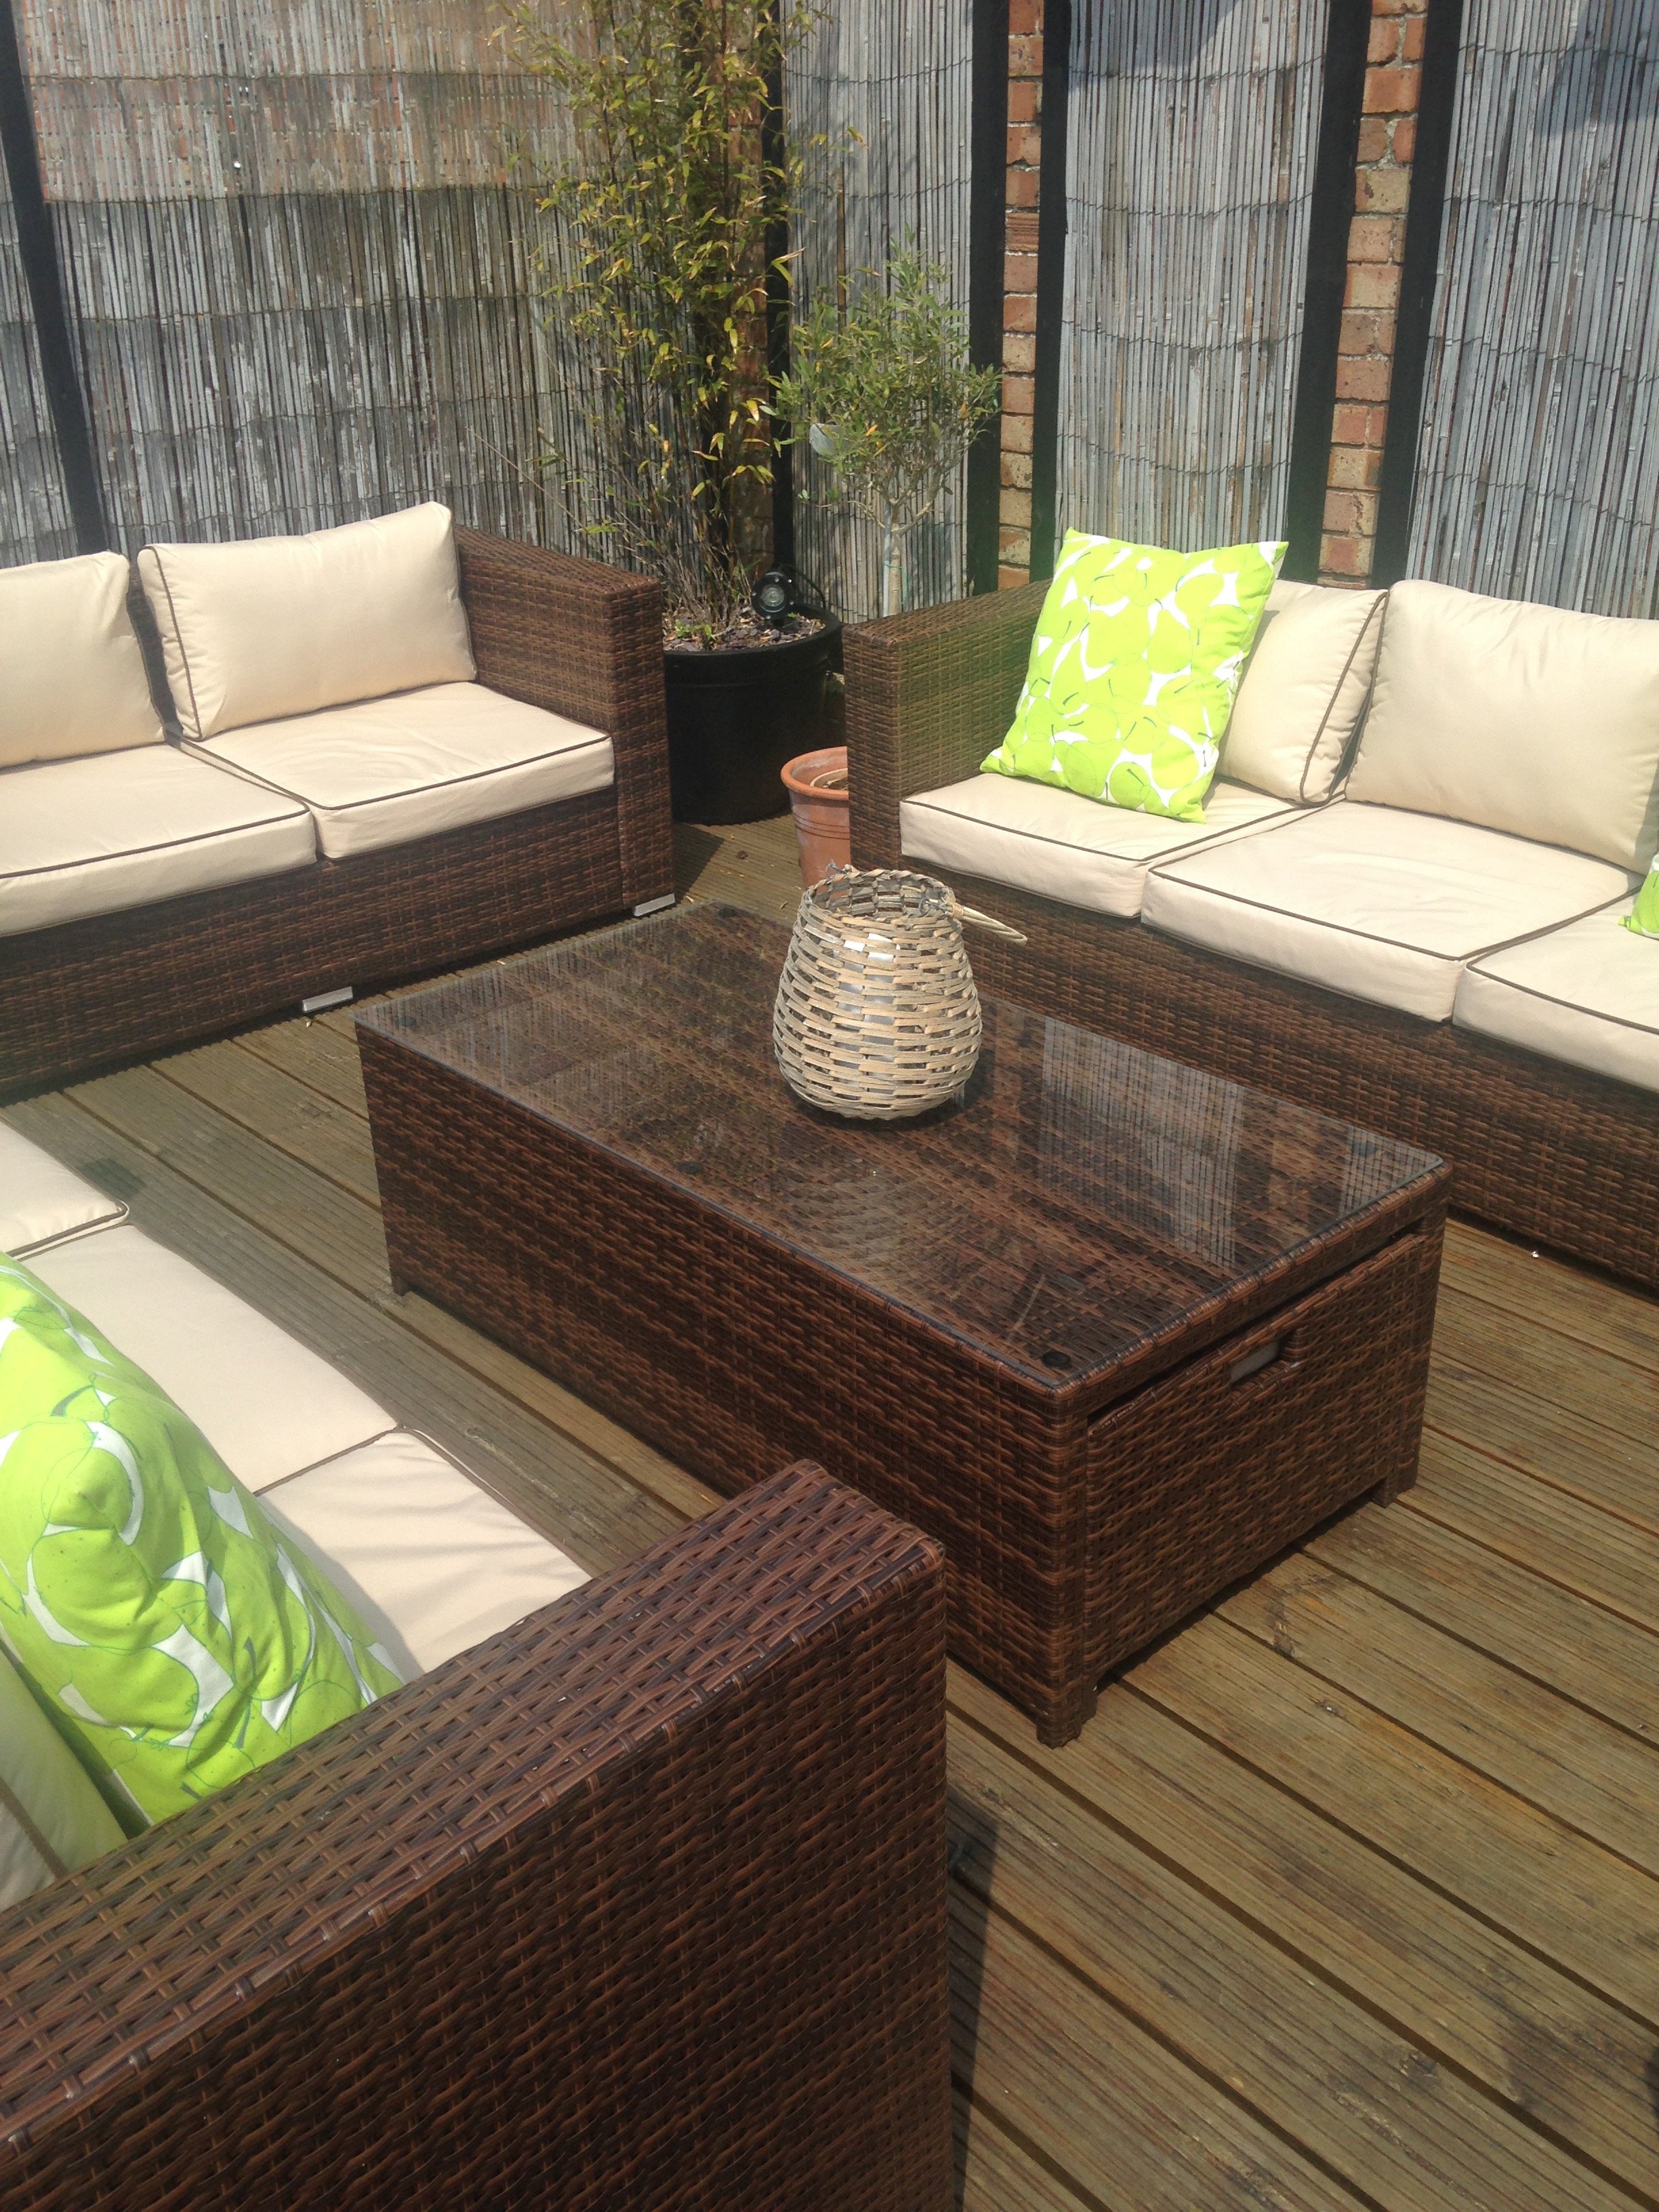 Creating the perfect decking area for your garden